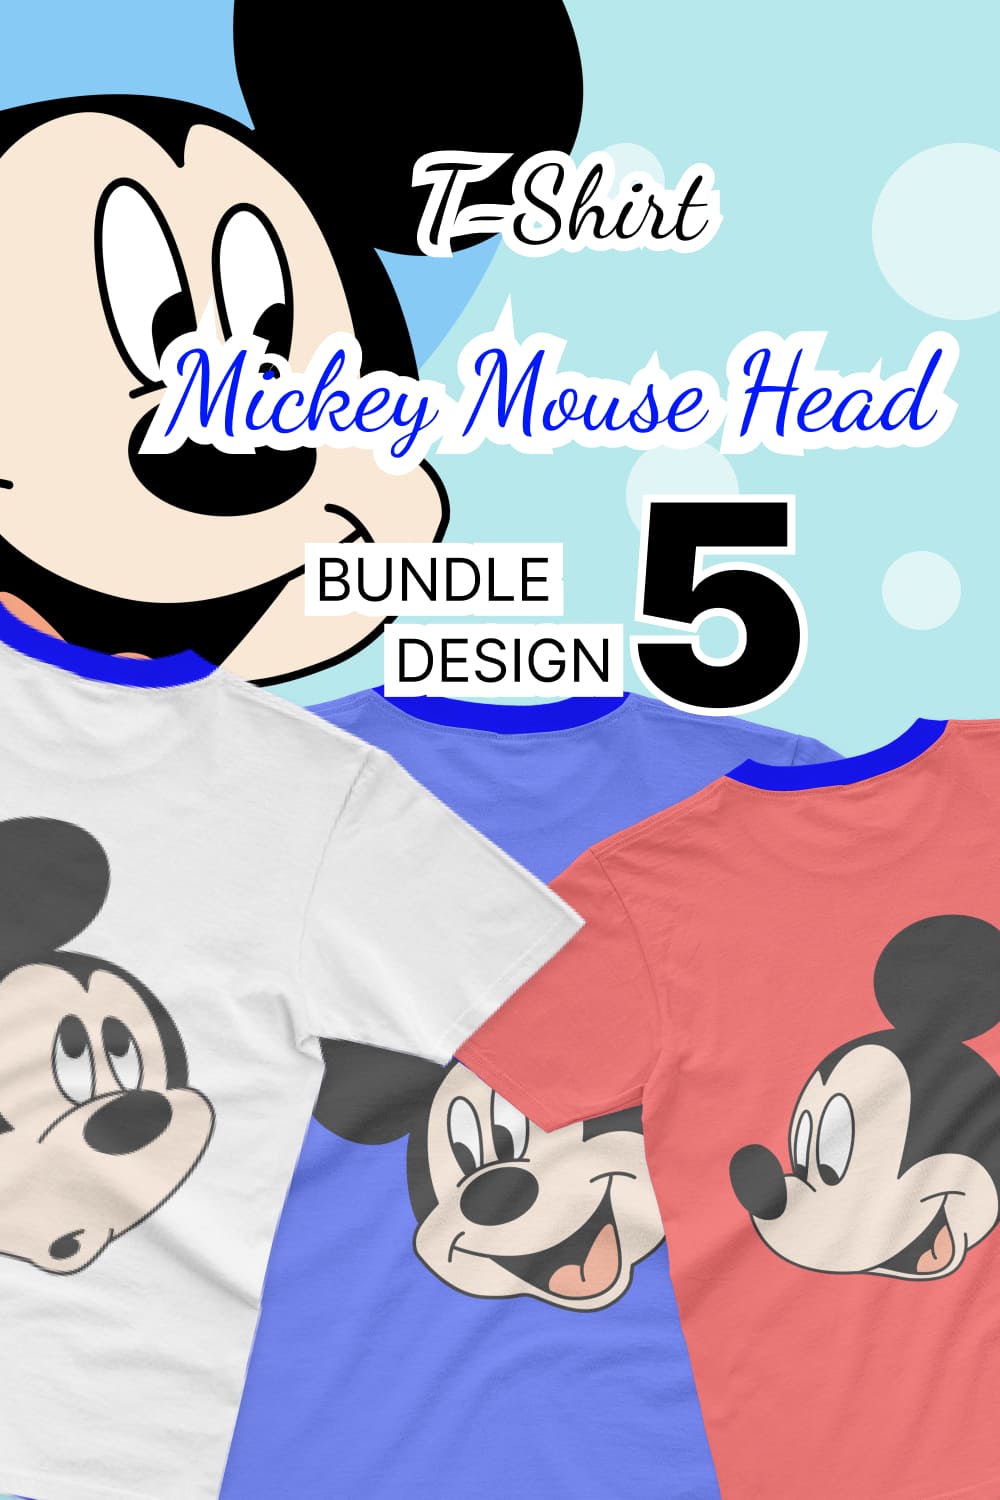 Mickey mouse head images of pinterest.